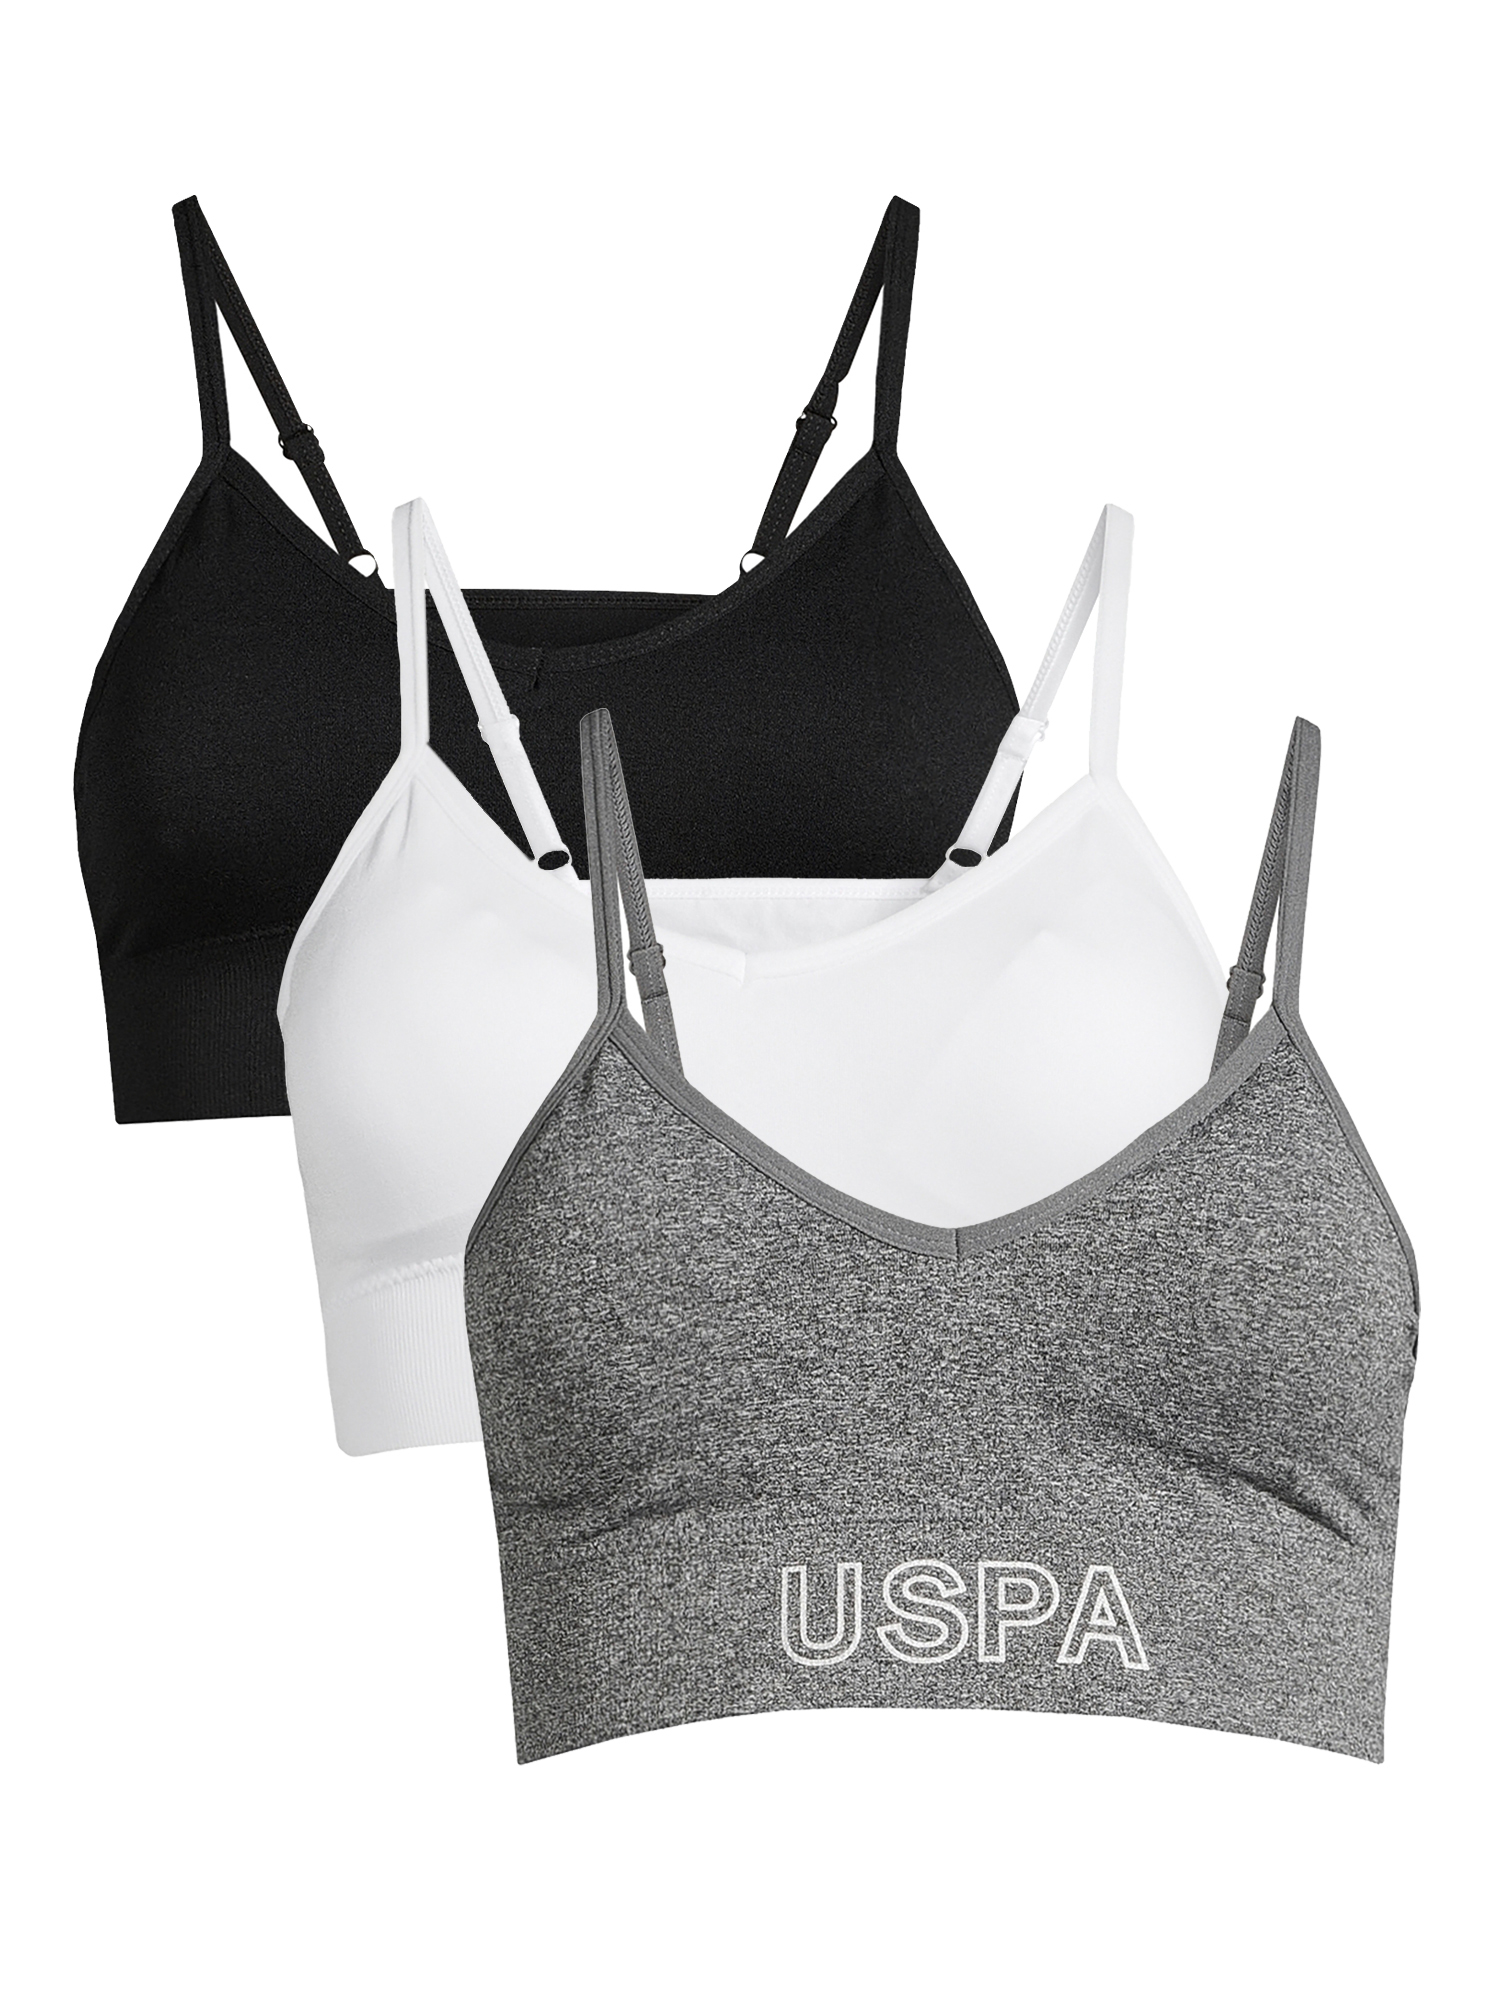 U.S. Polo Assn. Women's Tag-Free Seamless Comfort Bra Set, 3-Pack - image 1 of 3